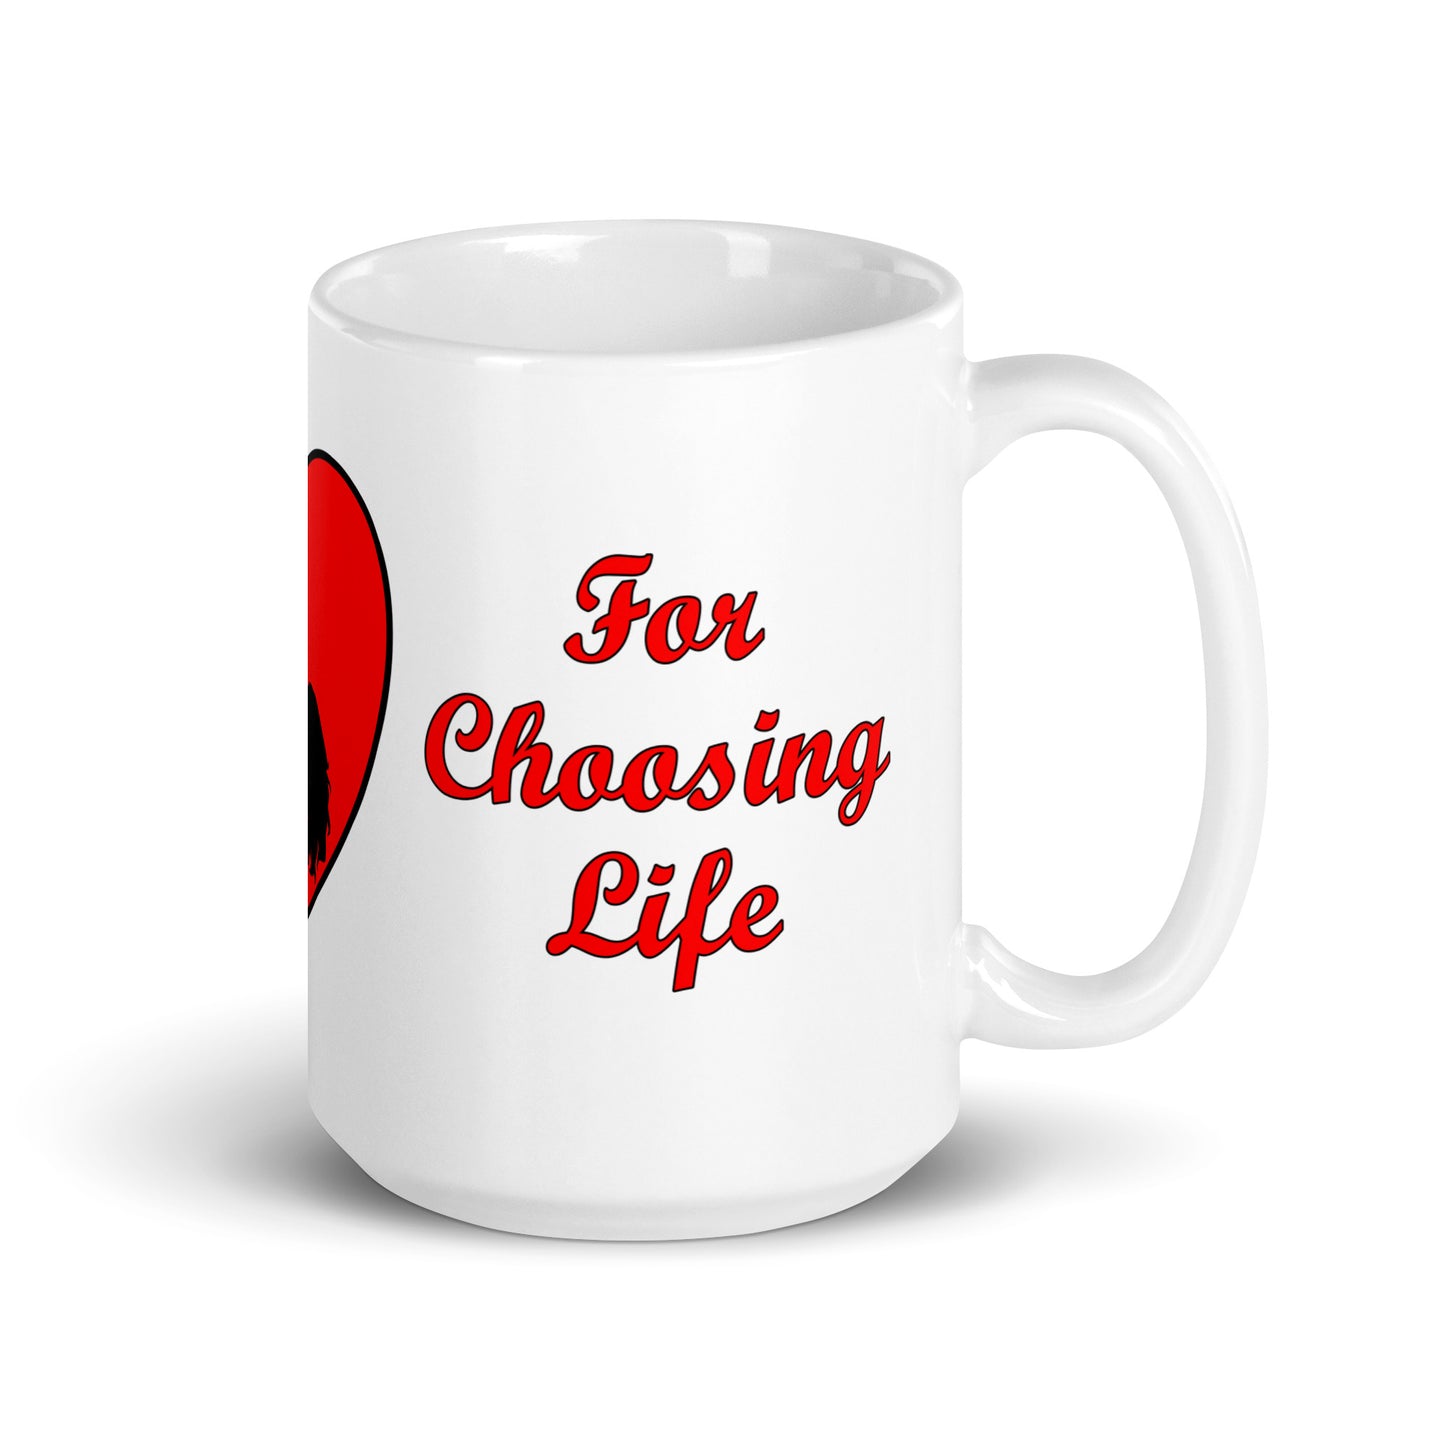 A002 Mug - White Glossy Ceramic Mug Featuring Mother and Baby Graphic with text “Thank You Mom For Choosing Life.”